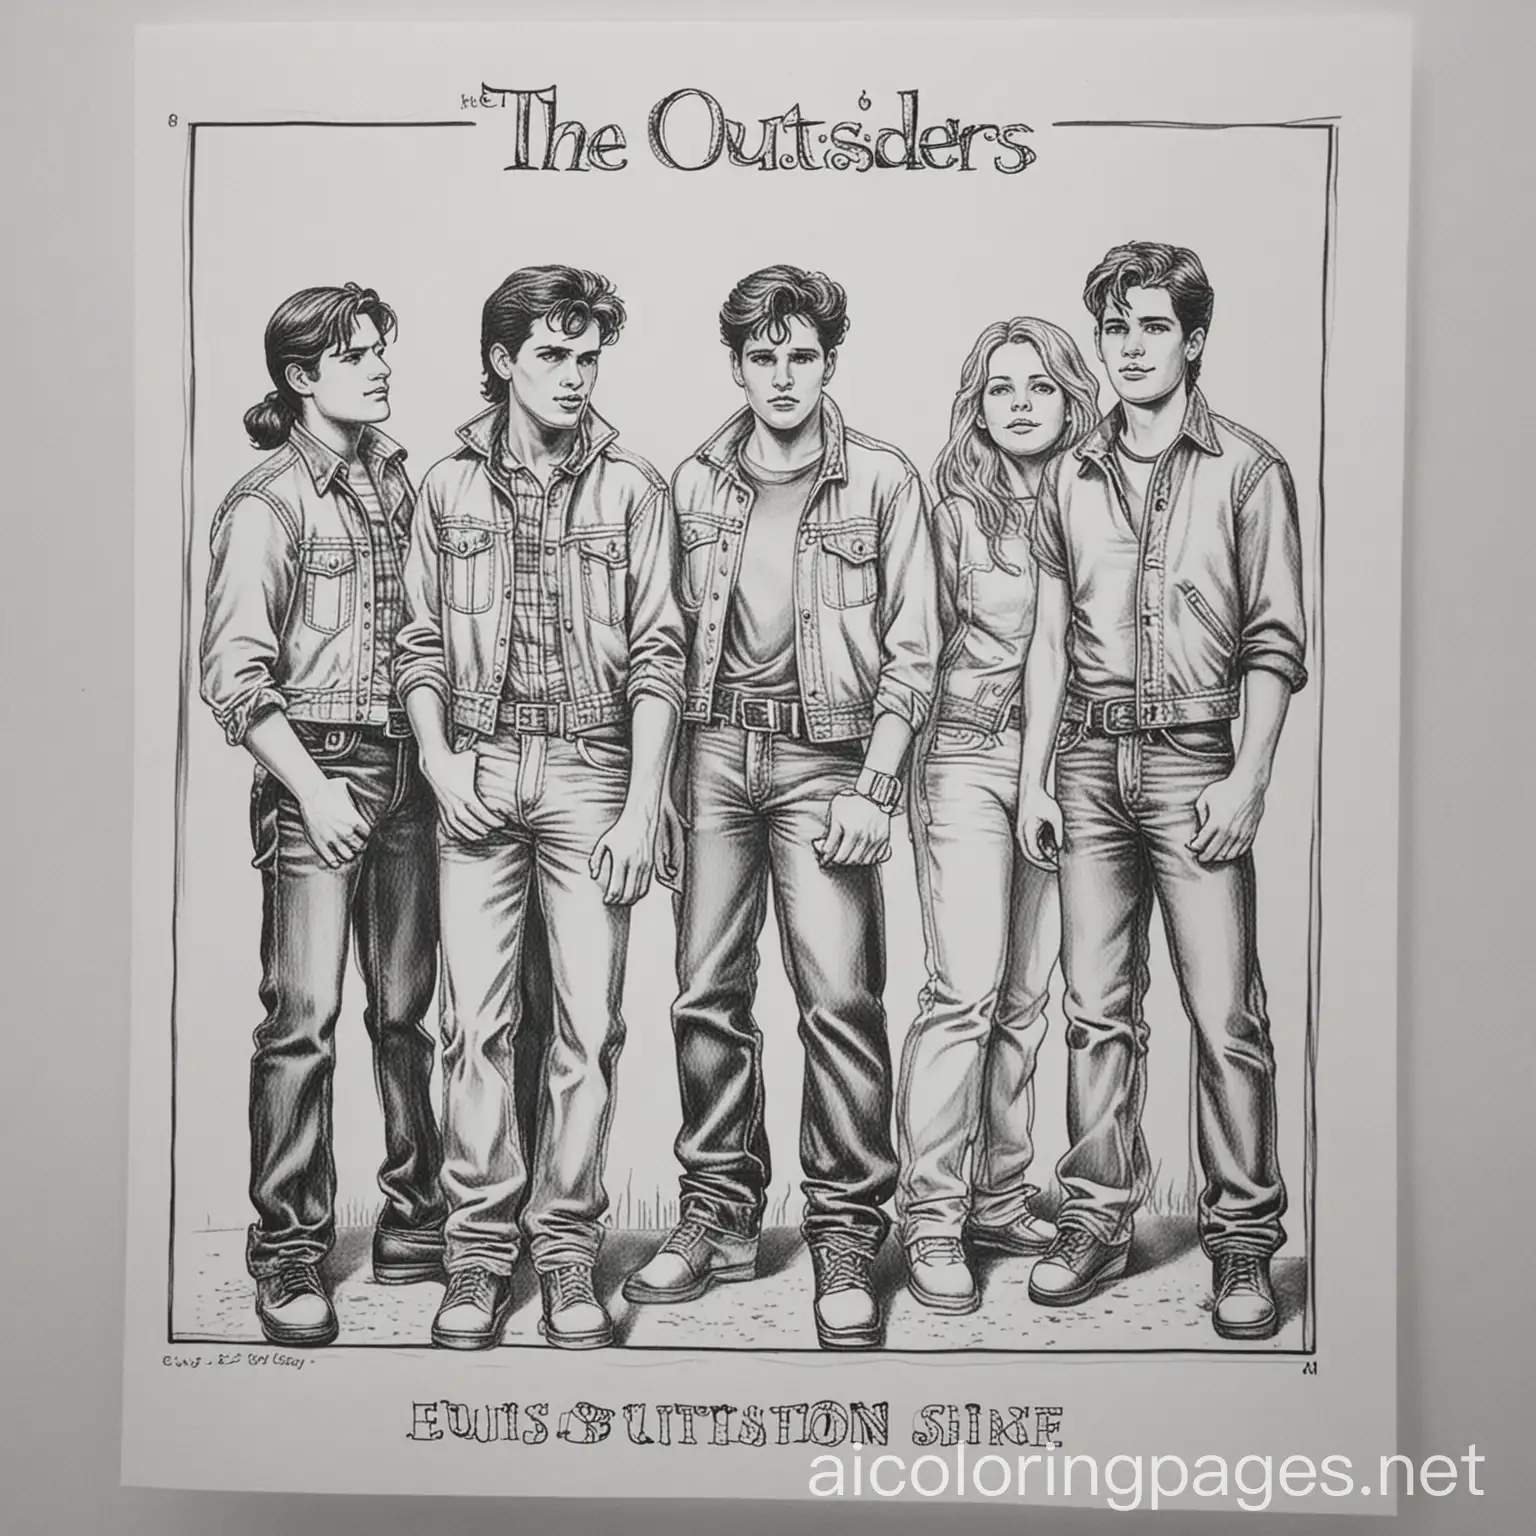 The Outsiders by S.E. Hinton Ponyboy Curtis, Coloring Page, black and white, line art, white background, Simplicity, Ample White Space. The background of the coloring page is plain white to make it easy for young children to color within the lines. The outlines of all the subjects are easy to distinguish, making it simple for kids to color without too much difficulty